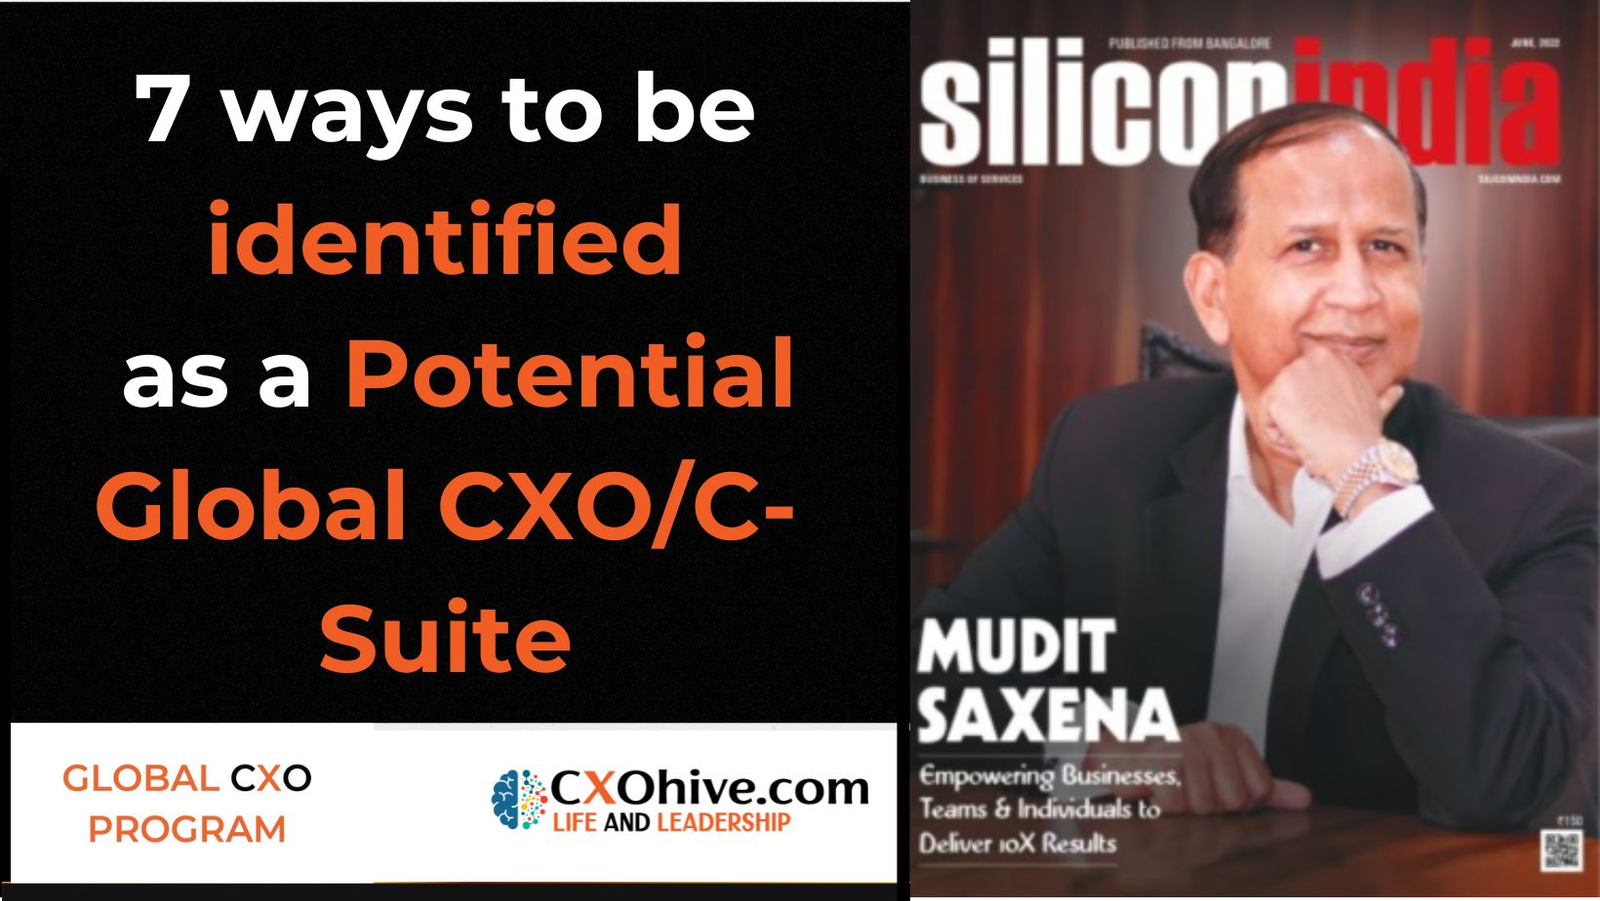 7 ways to be identified as a Potential Global CXO/C-Suite